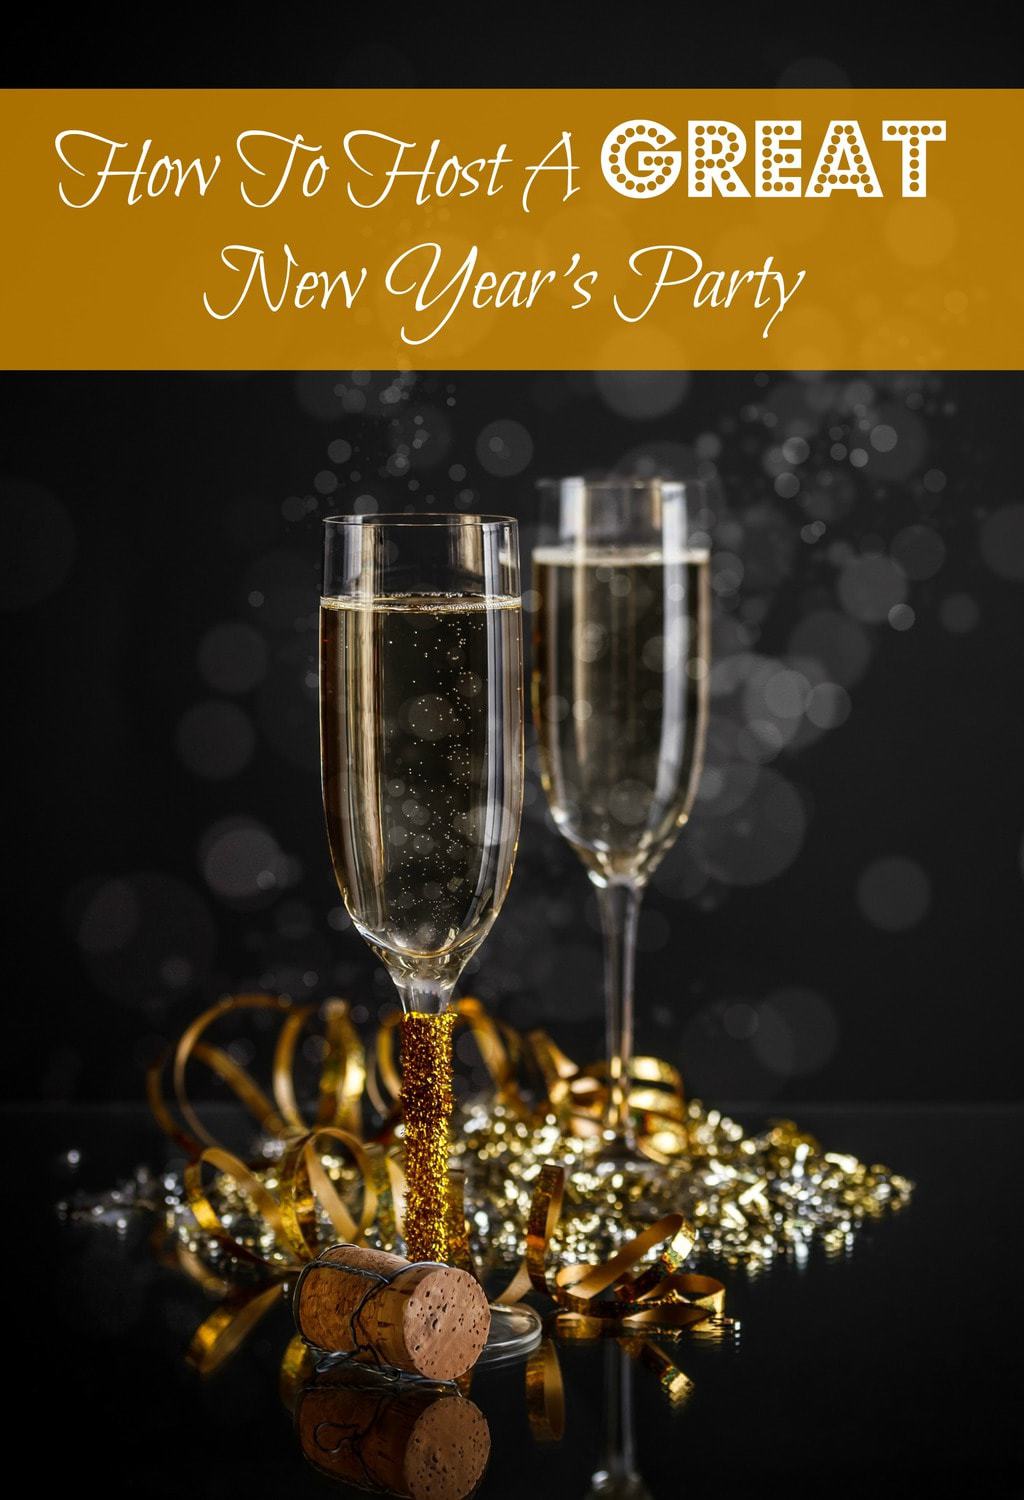 How To Host A Great New Year’s Party!